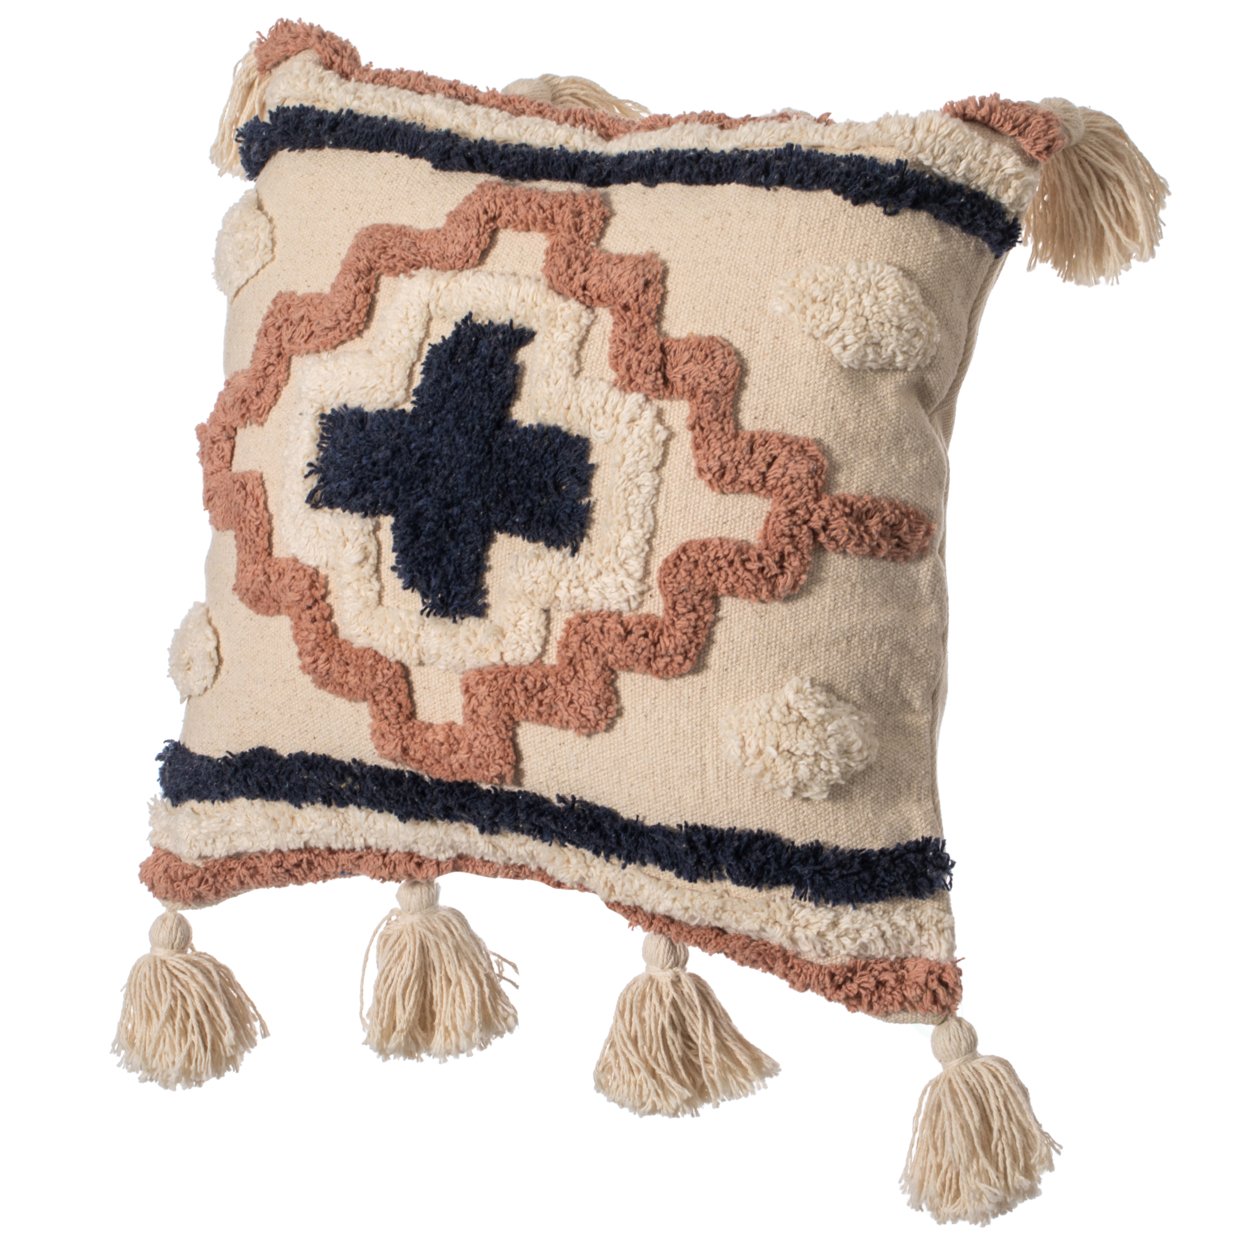 16 Handwoven Cotton Throw Pillow Cover With Tufted Designs And Side Tassels - Border